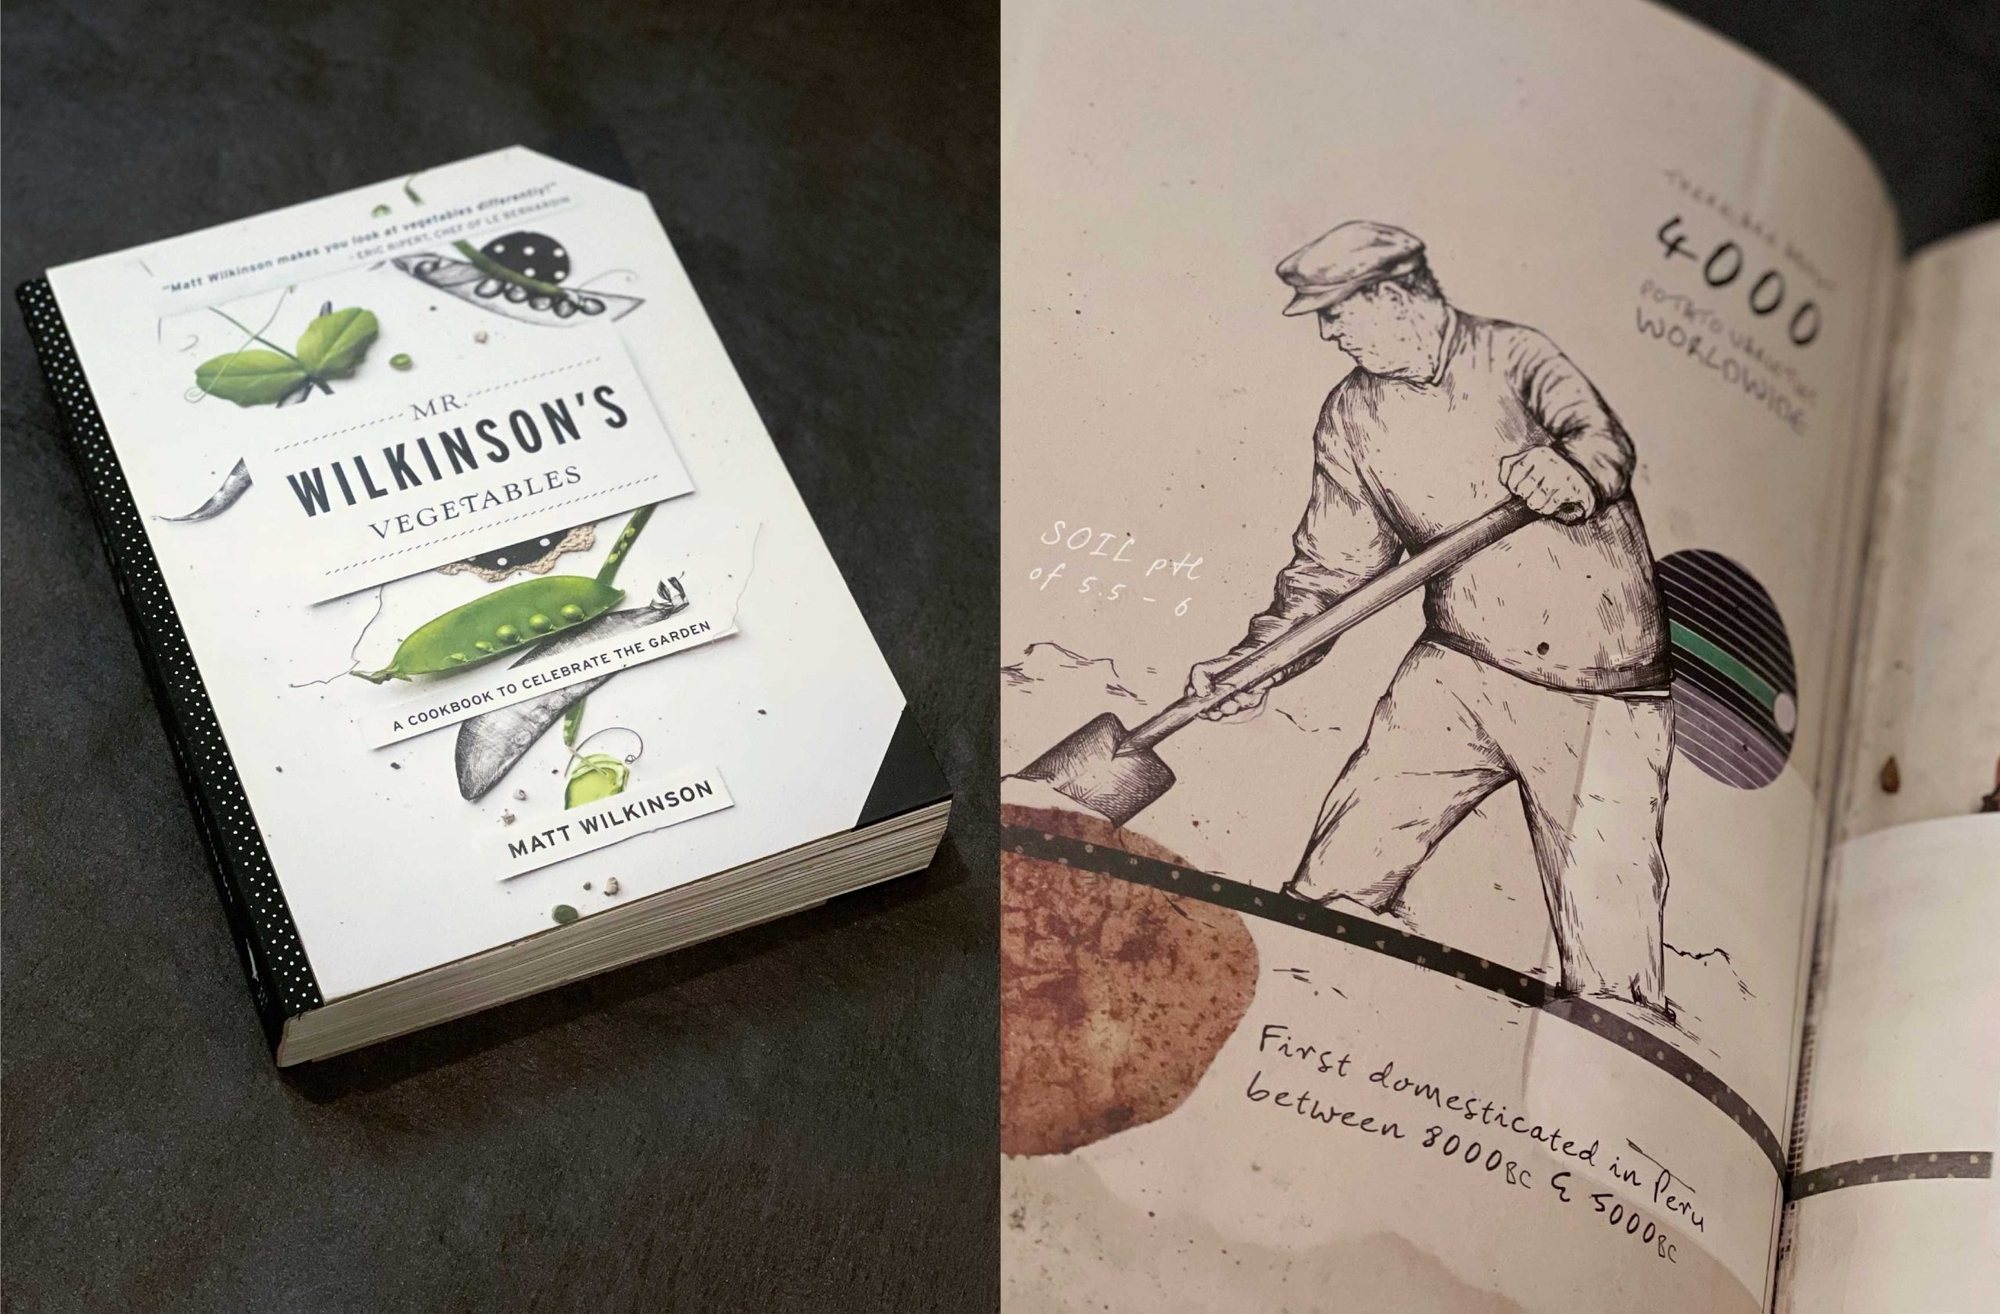 Mr. Wilkinson's Vegetables cover with inset photograph